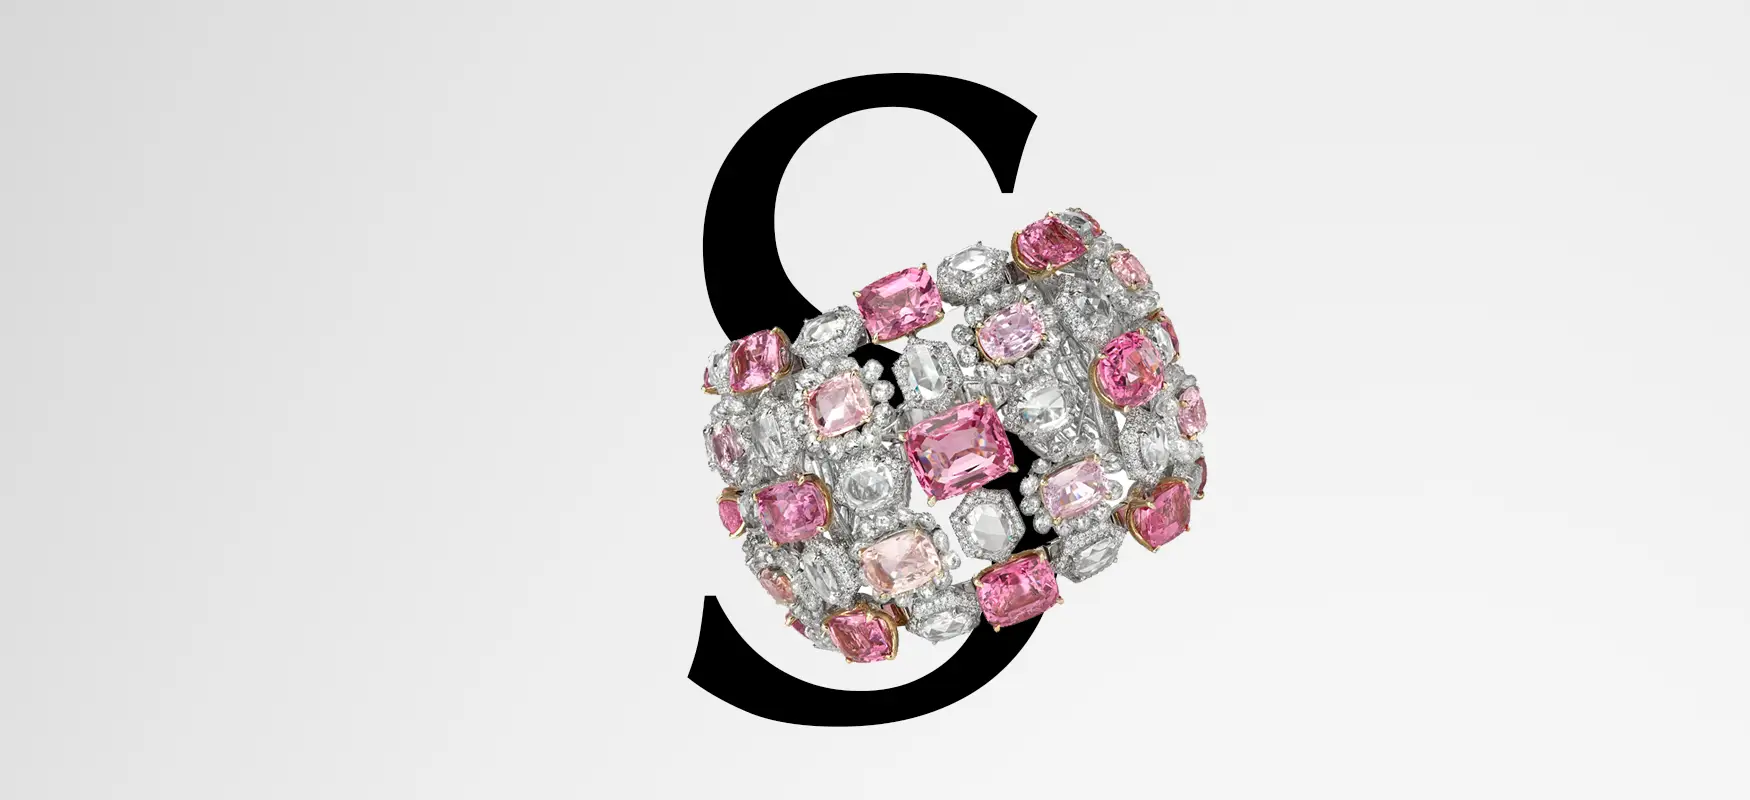 S for Spinel